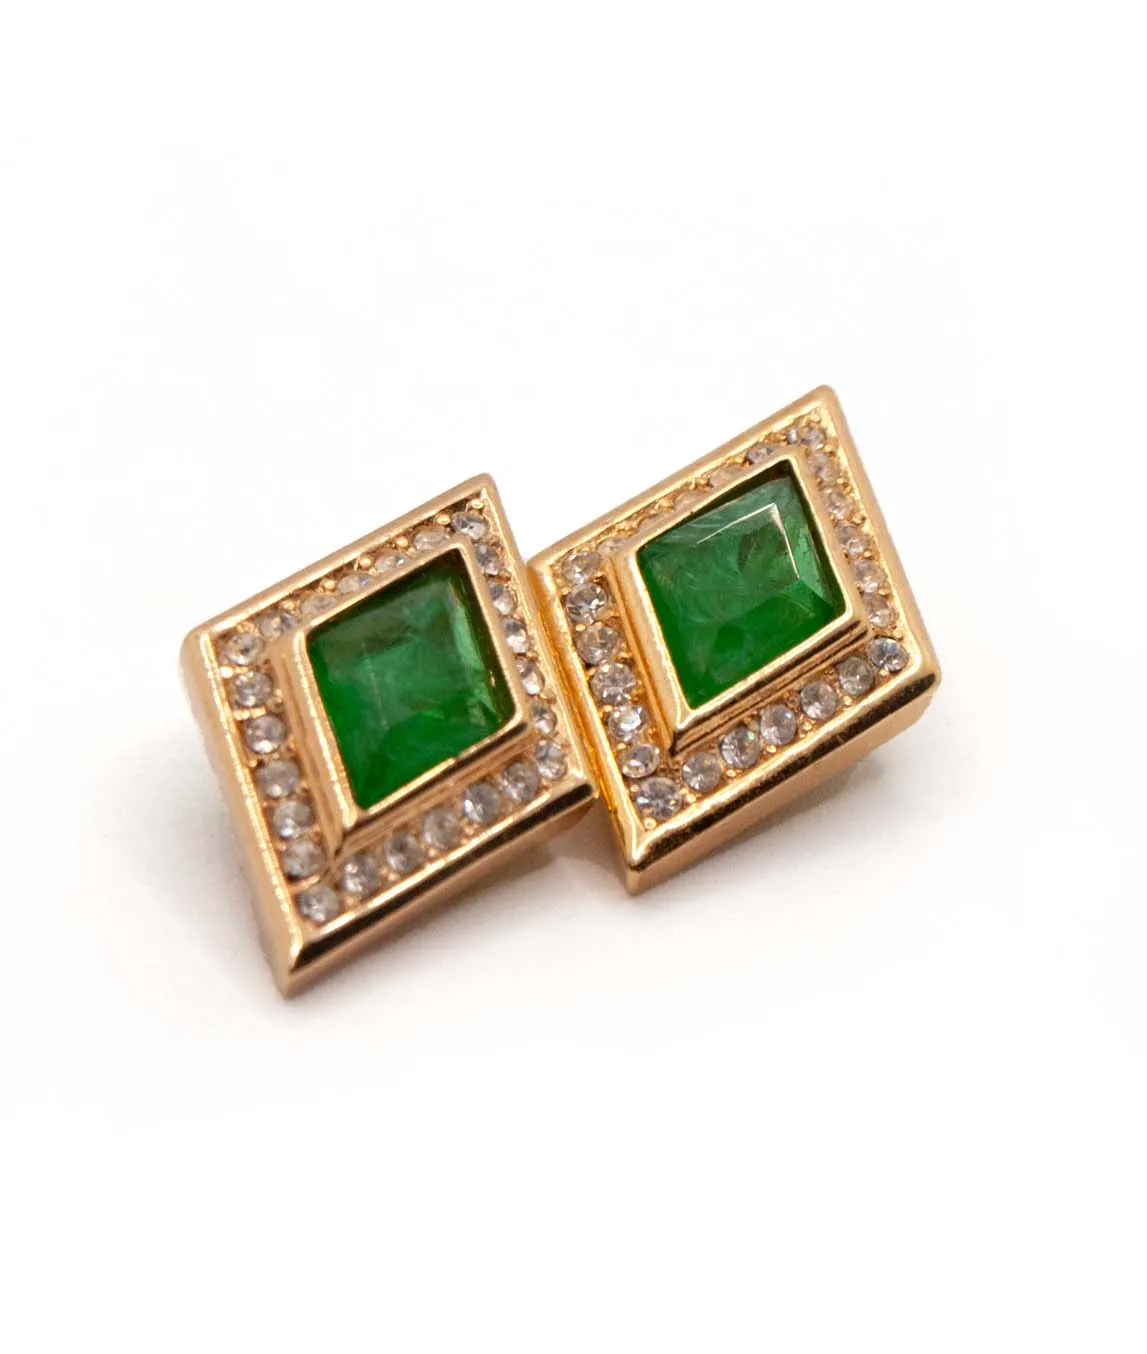 1980s Christian Dior diamond shaped clip earrings with flawed emerald art glass and rhinestones